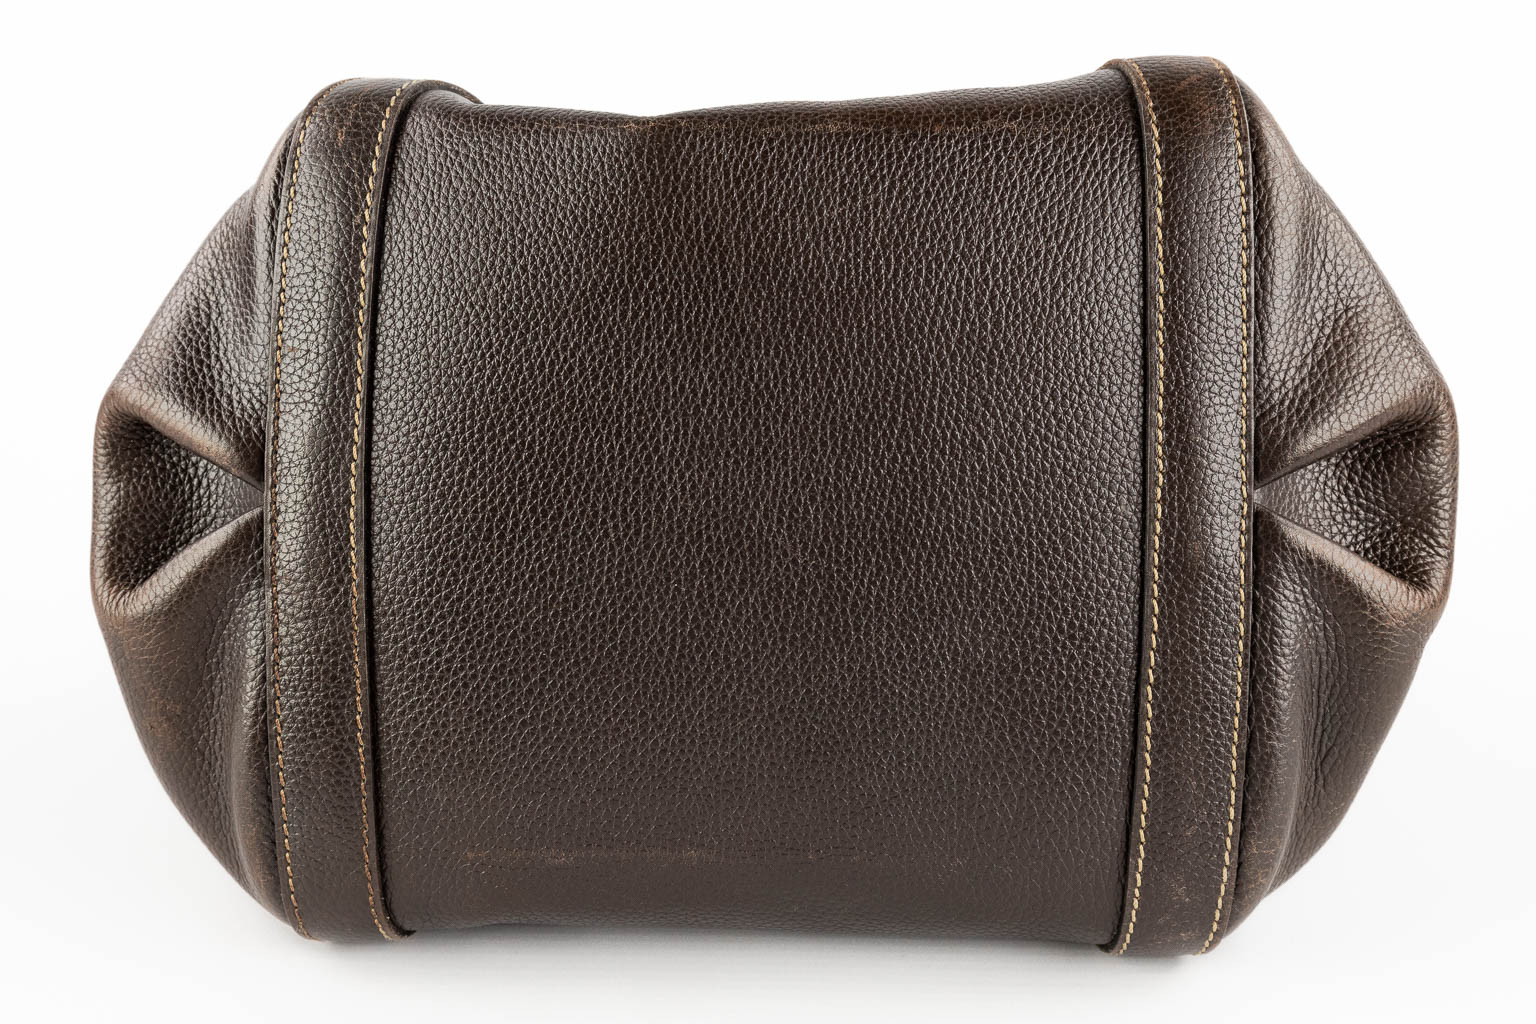 Delvaux Punch, a handbag made of brown leather. (W:30 x H:38 x D:17 cm)